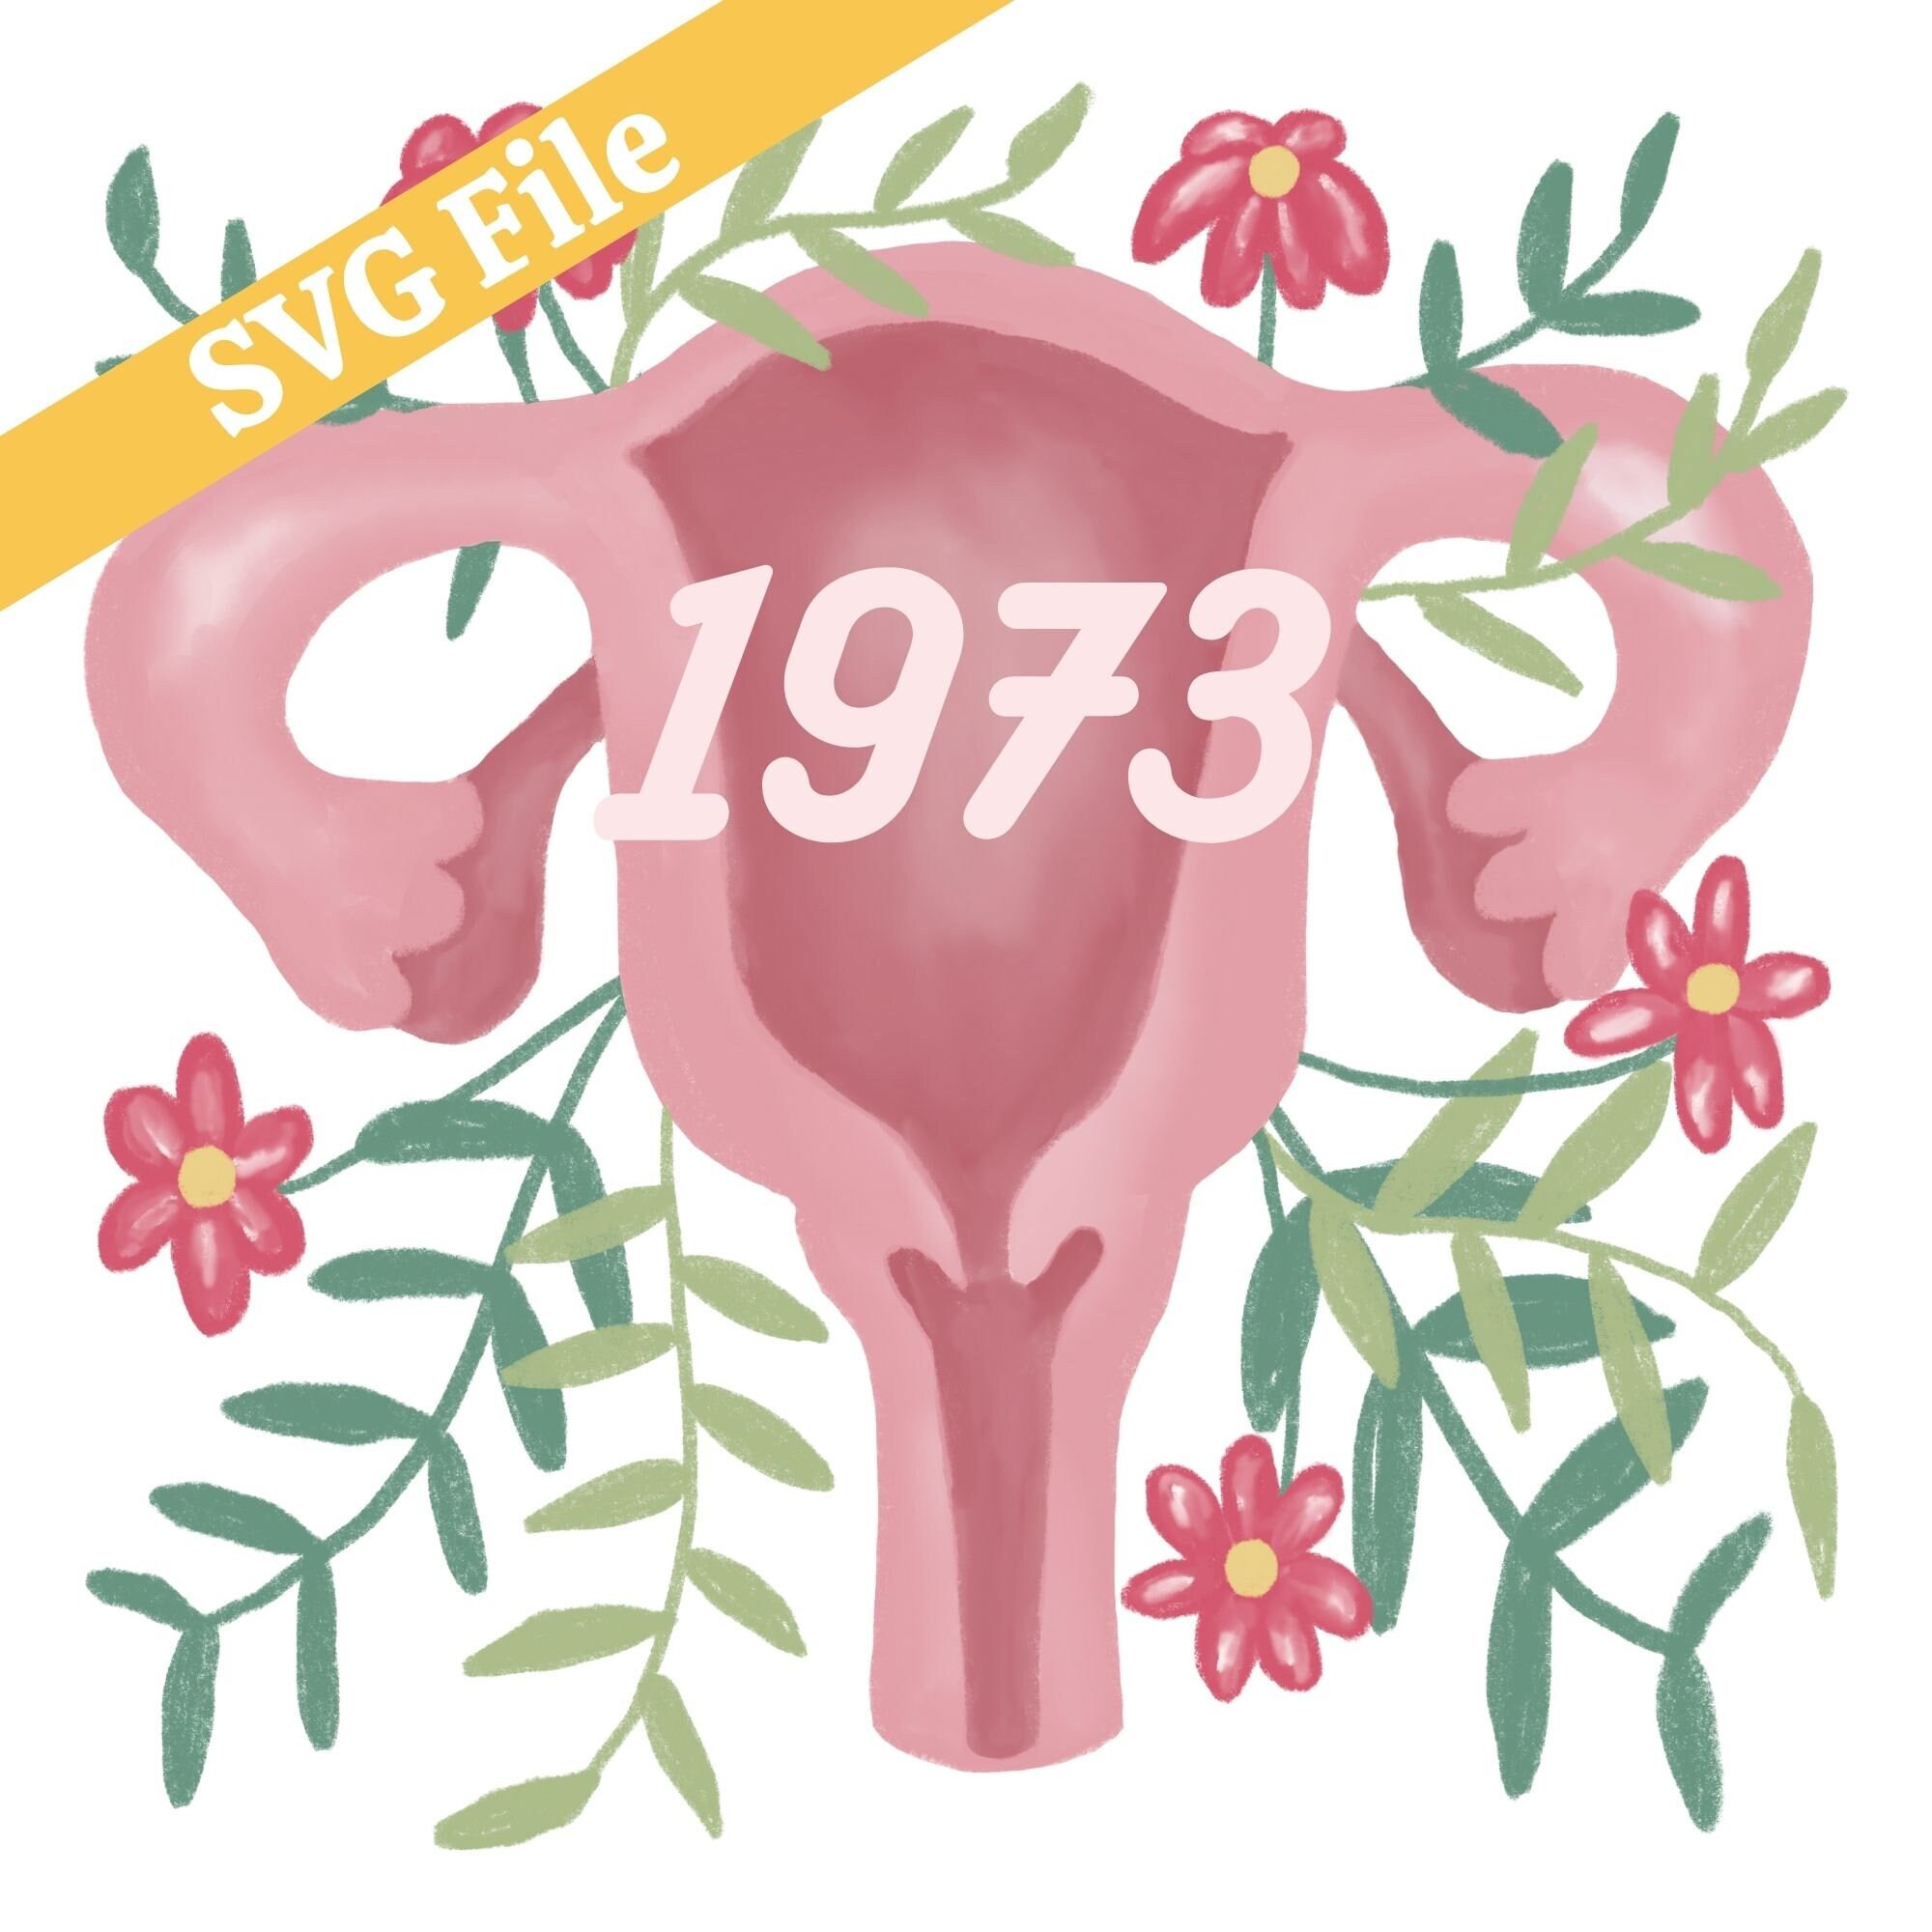 1973 Uterus SVG File - Roe v Wade Pro Choice - Cricut and Silhouette Vinyl Cut Vector File for Commercial Use